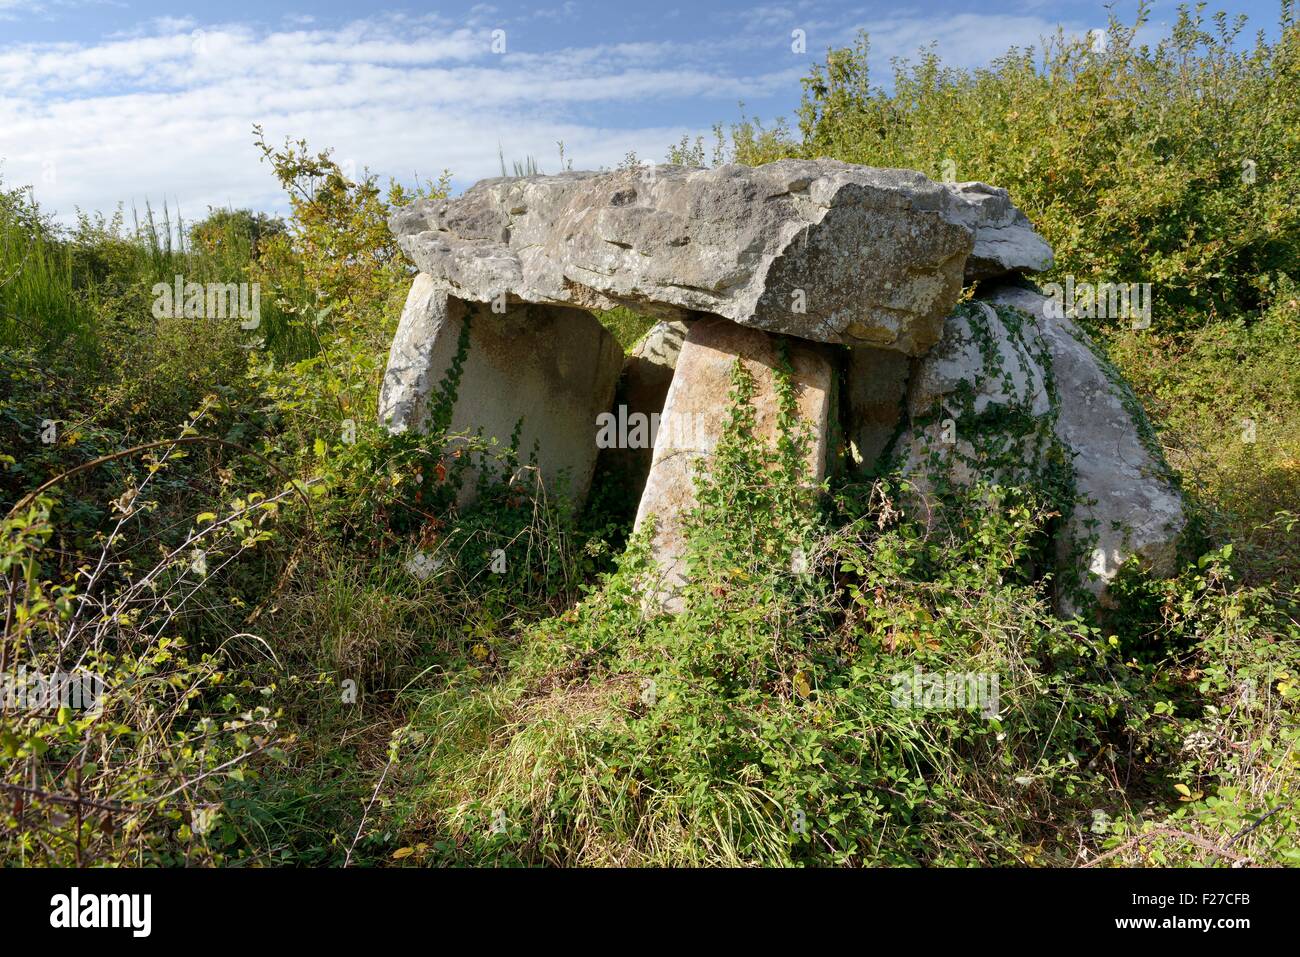 Prehistoric Neolithic dolmen burial chambered tomb of Kercadoret at the top of the Locmariaquer peninsula, Brittany, France Stock Photo